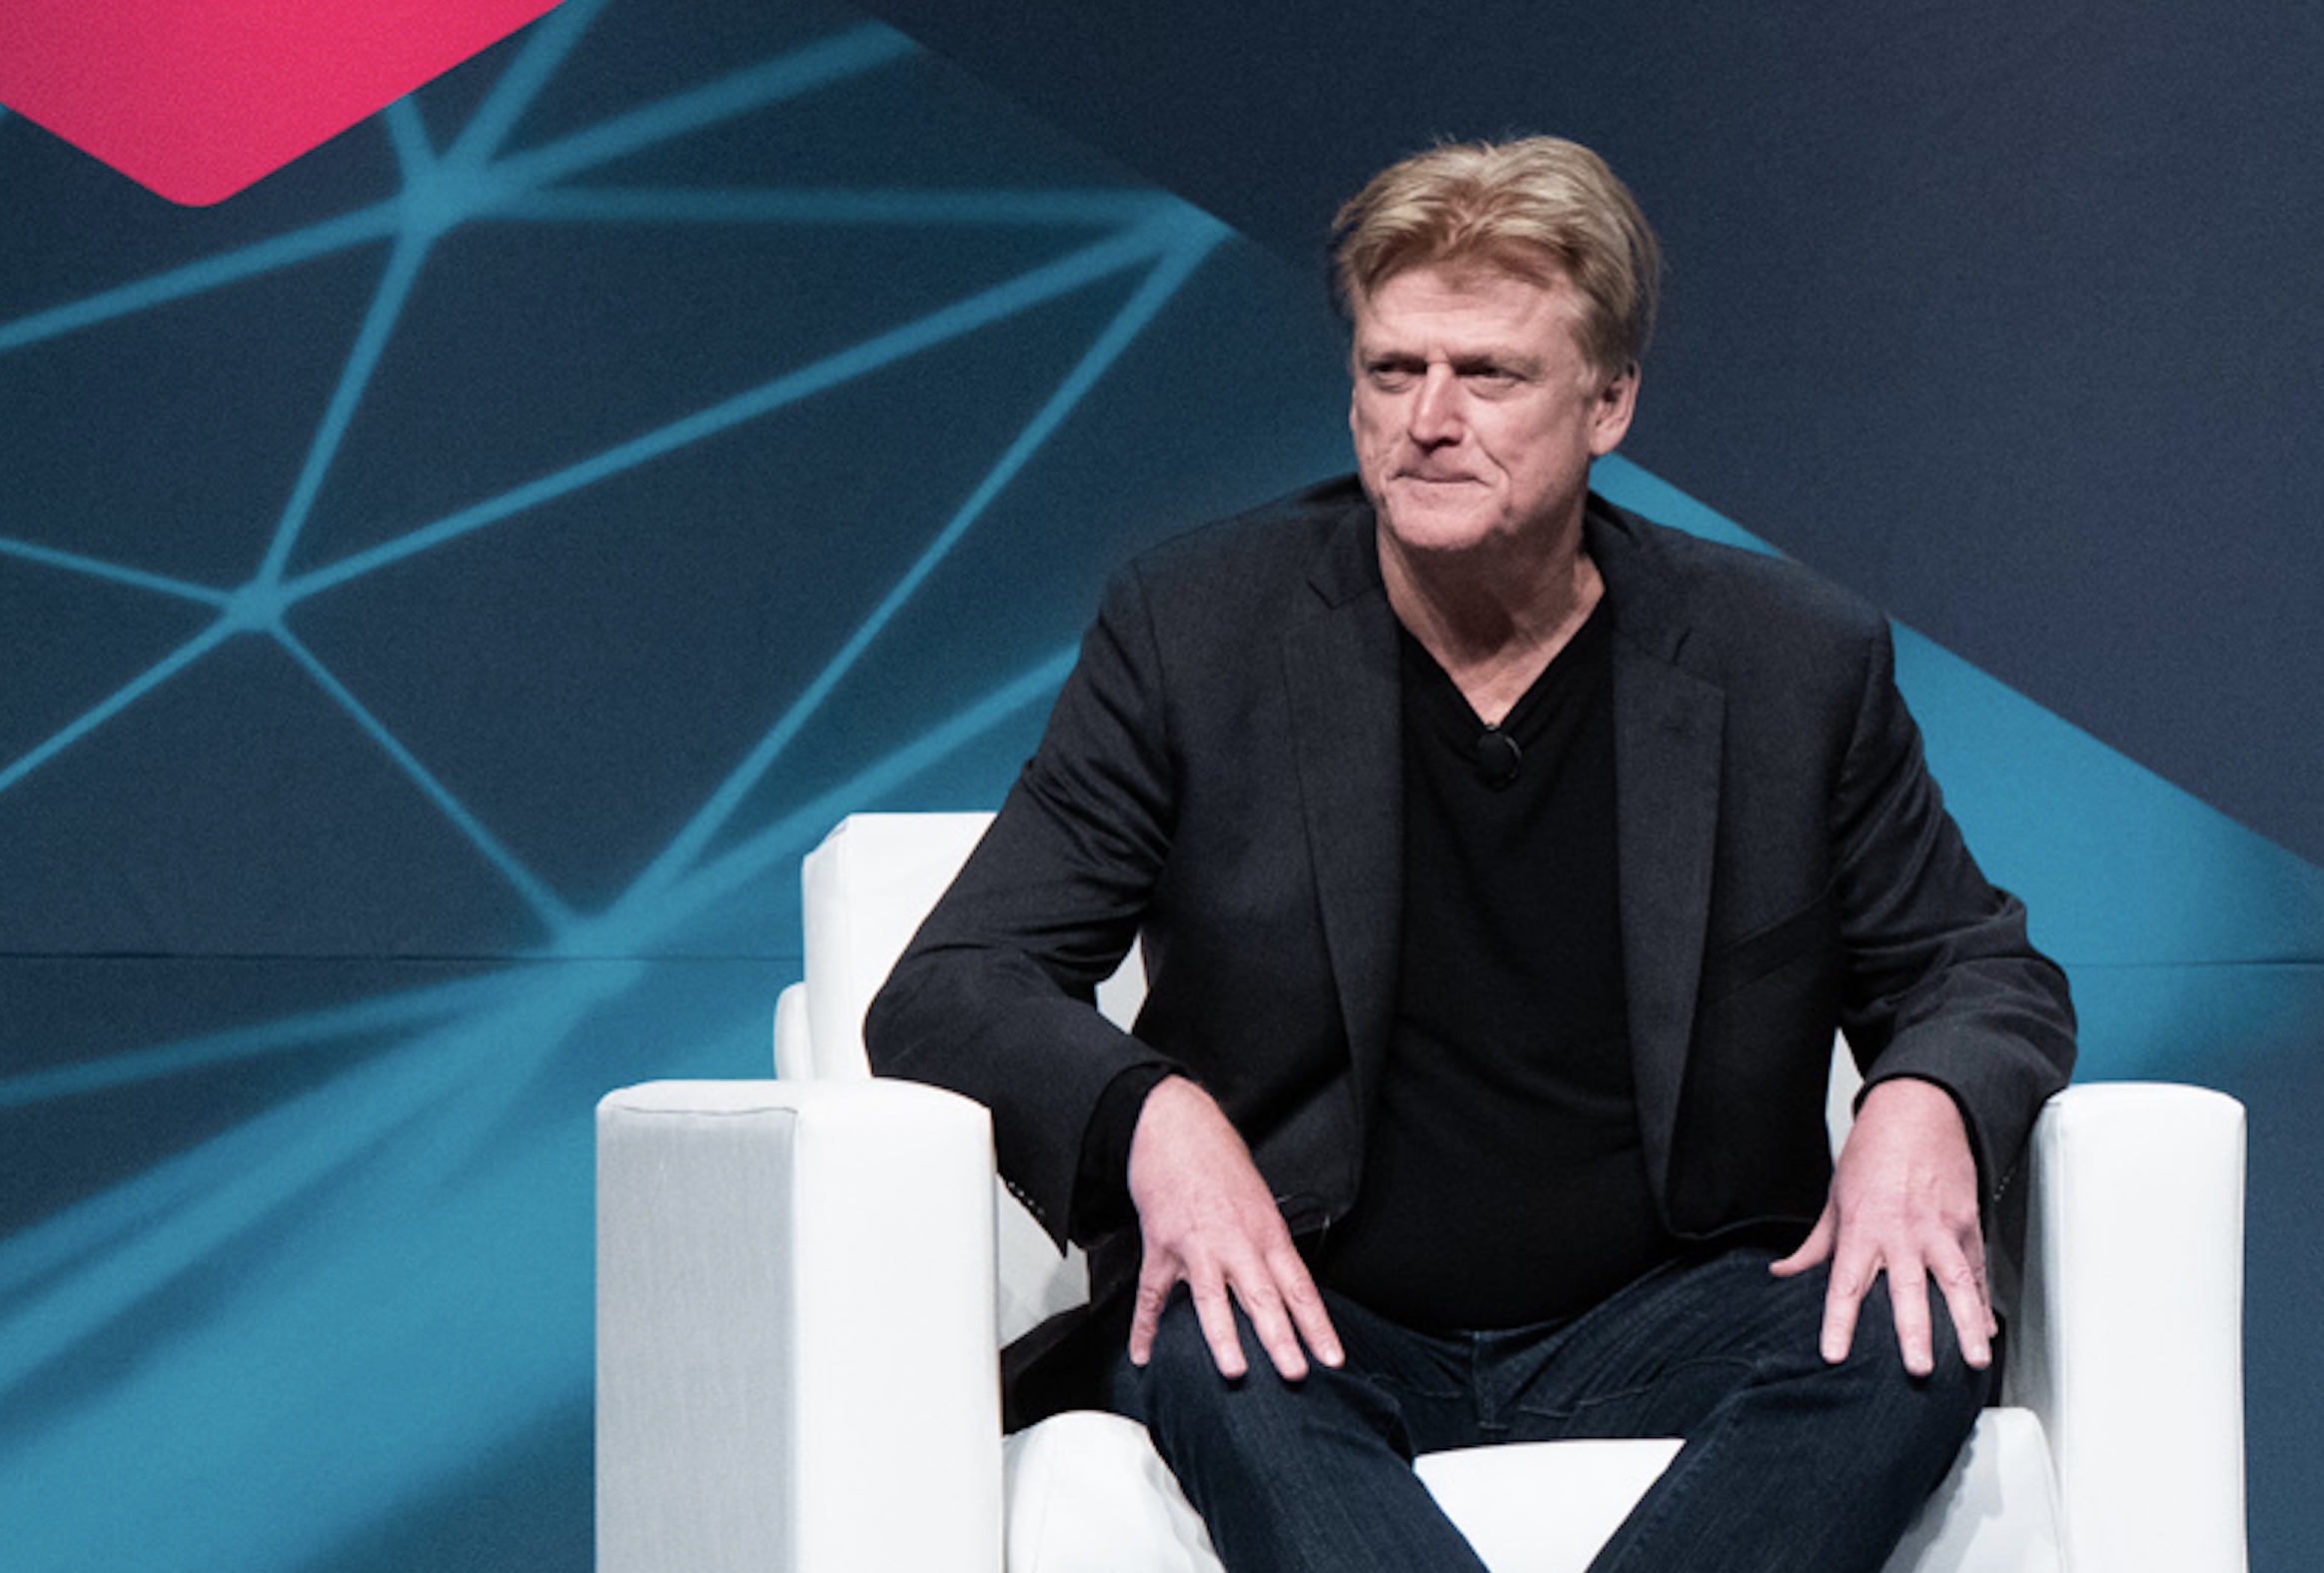 Patrick Byrne, Cryptocurrency Champion, Resigns As Overstock CEO